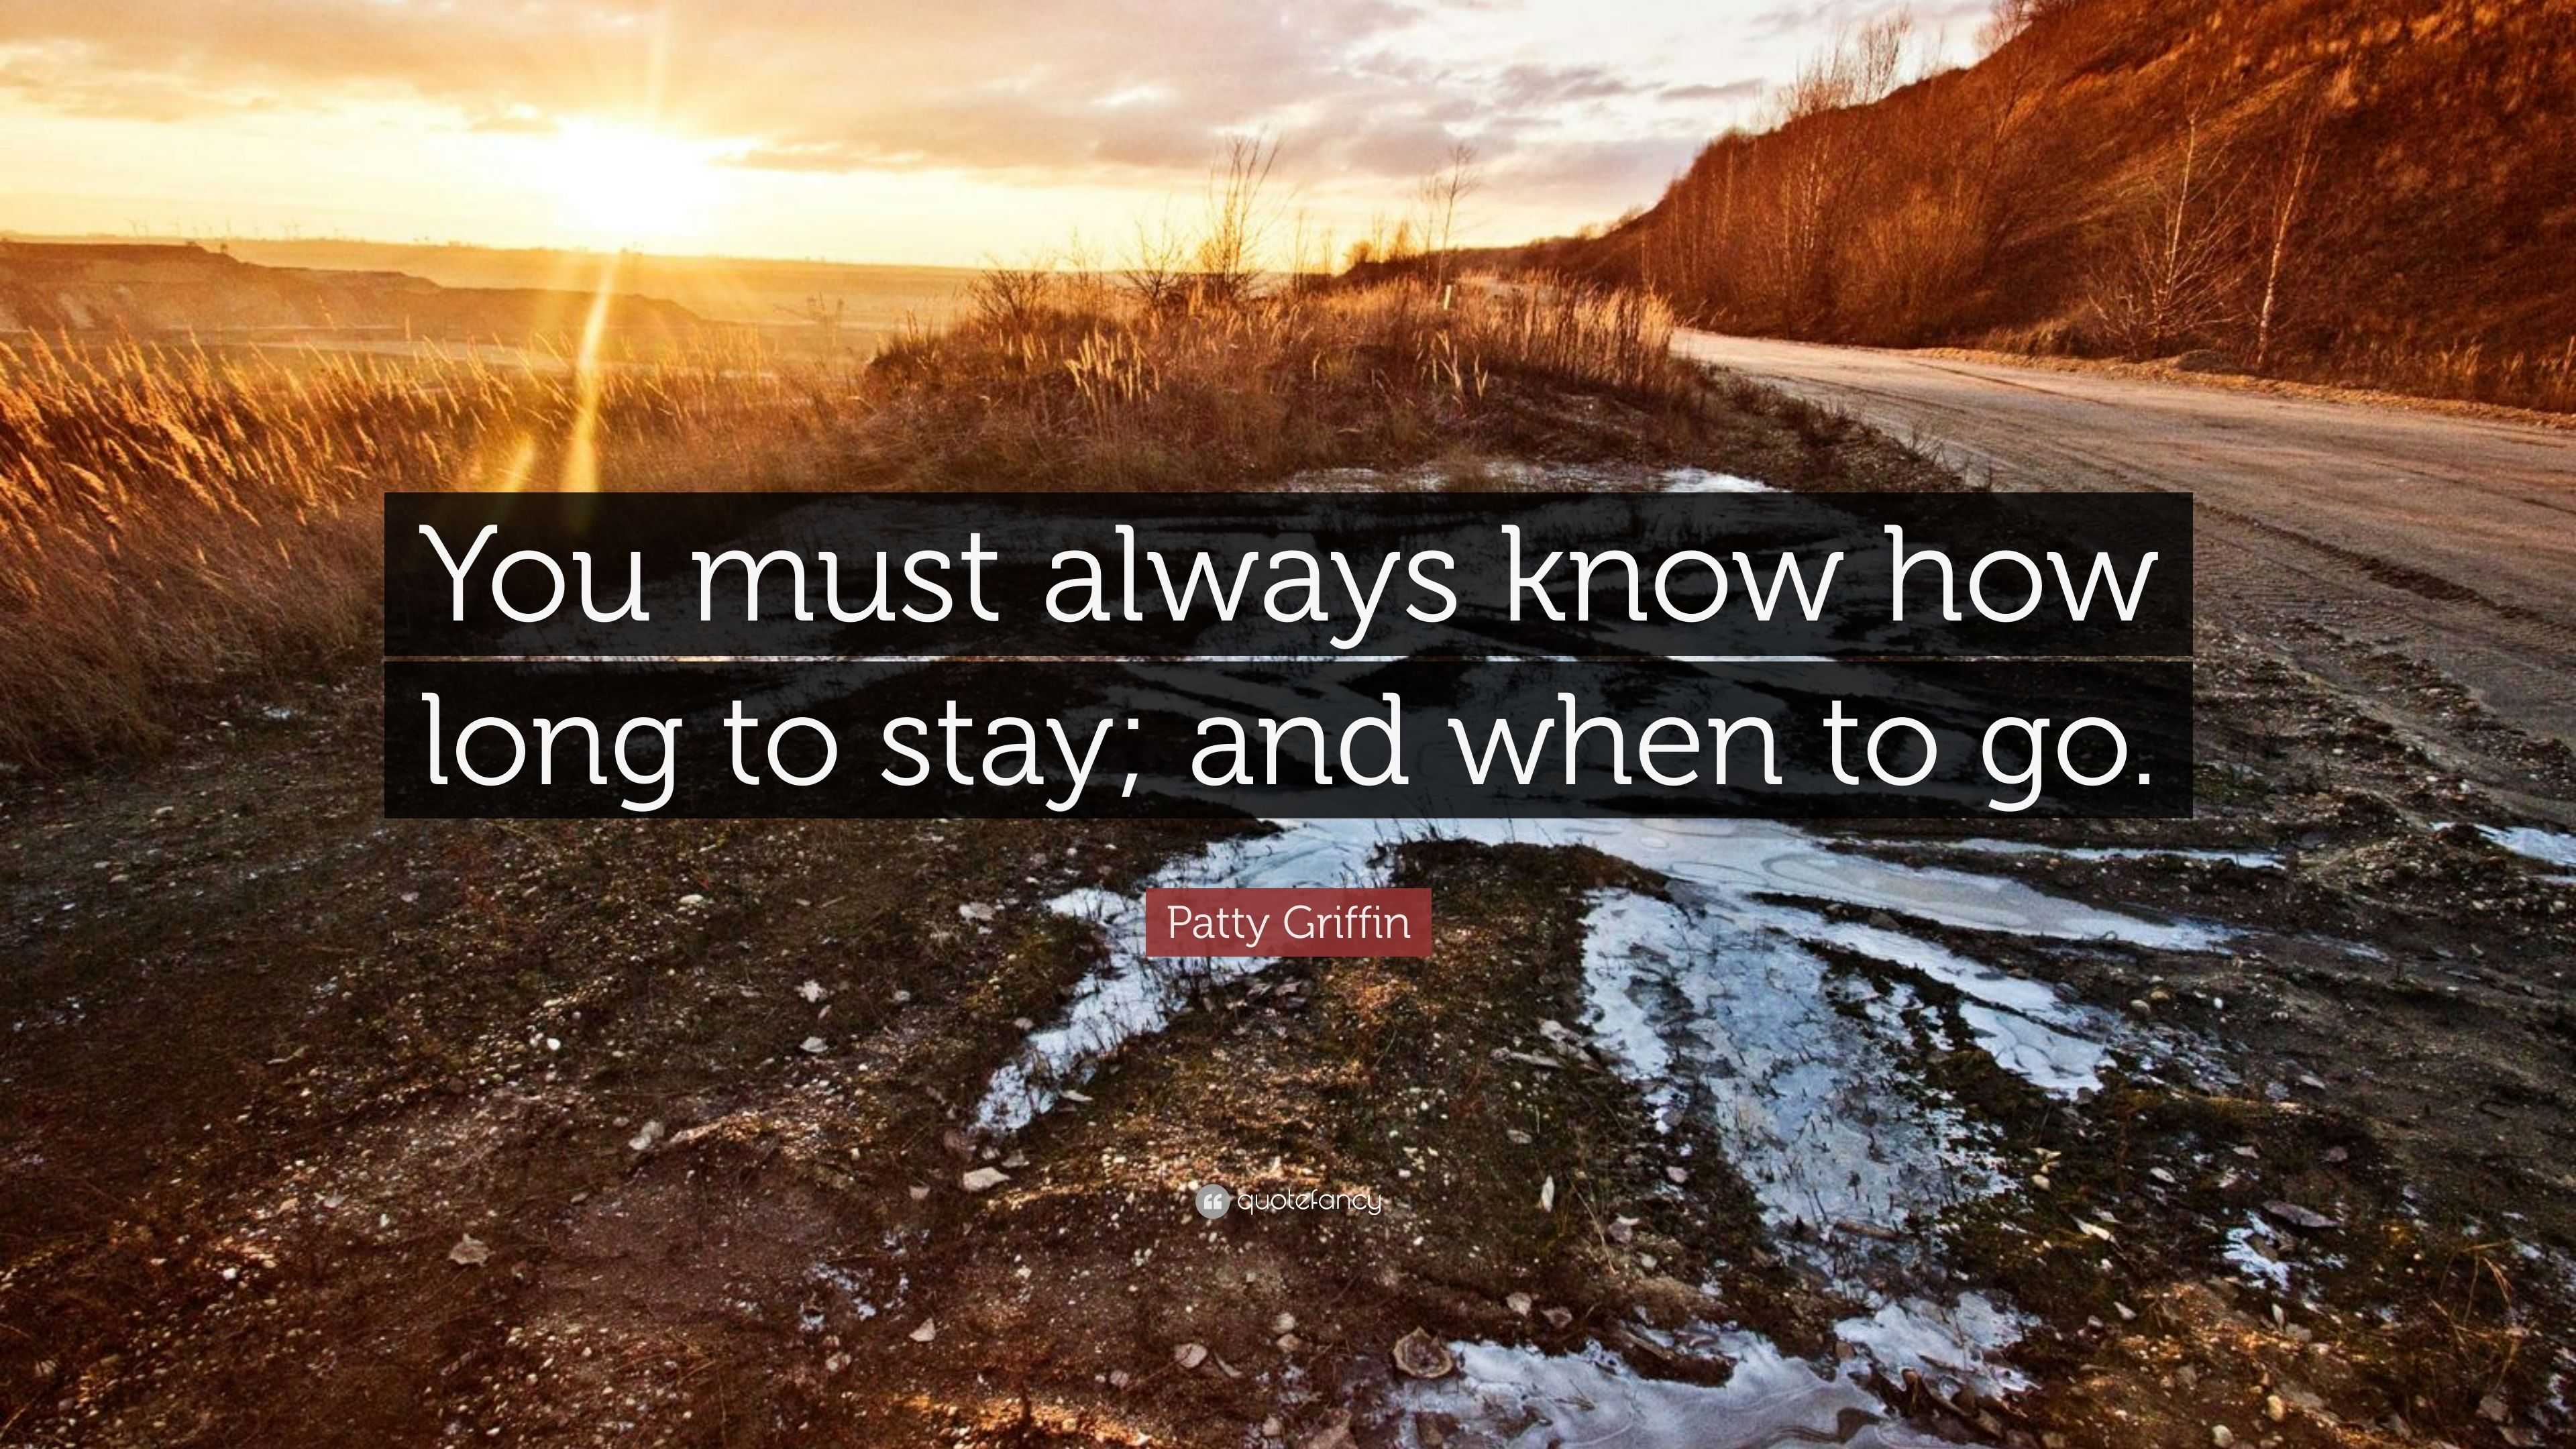 https://quotefancy.com/media/wallpaper/3840x2160/2970972-Patty-Griffin-Quote-You-must-always-know-how-long-to-stay-and-when.jpg